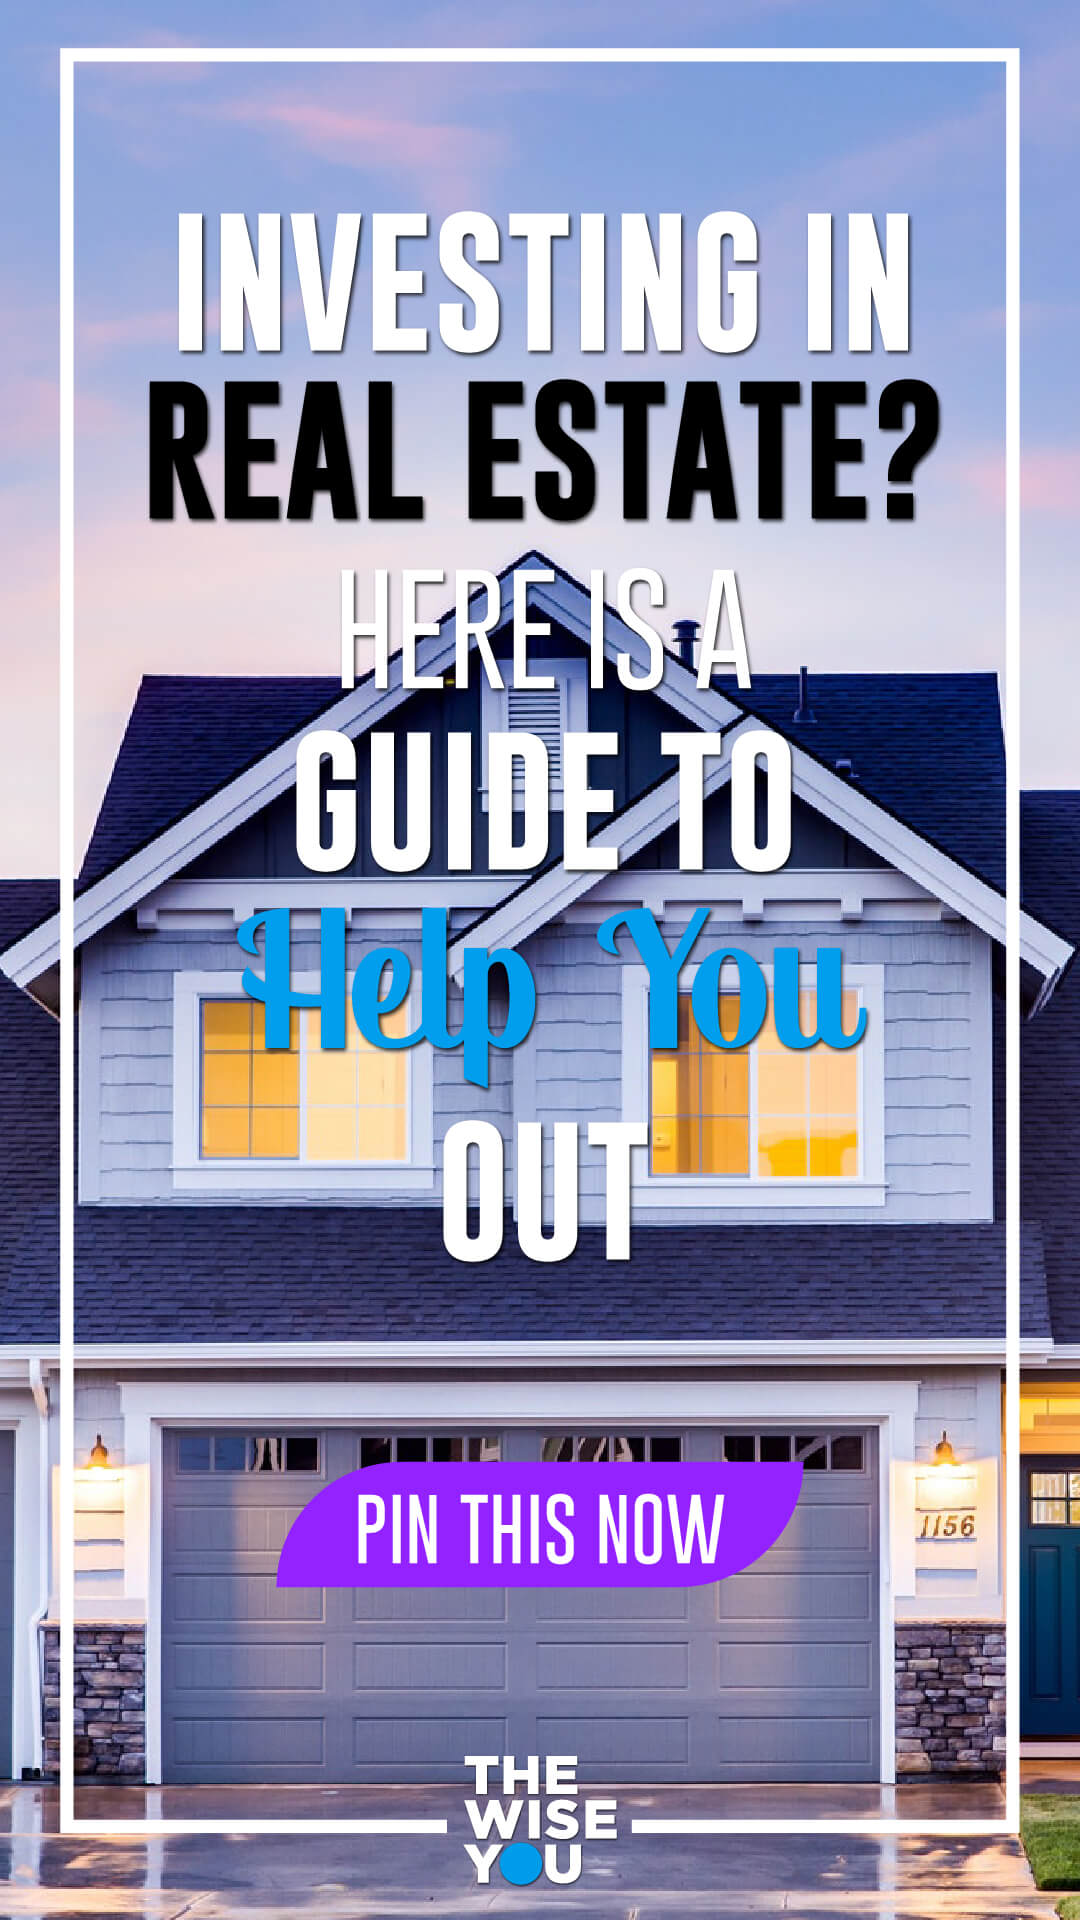 Investing in Real Estate? Here is a Guide to Help You Out